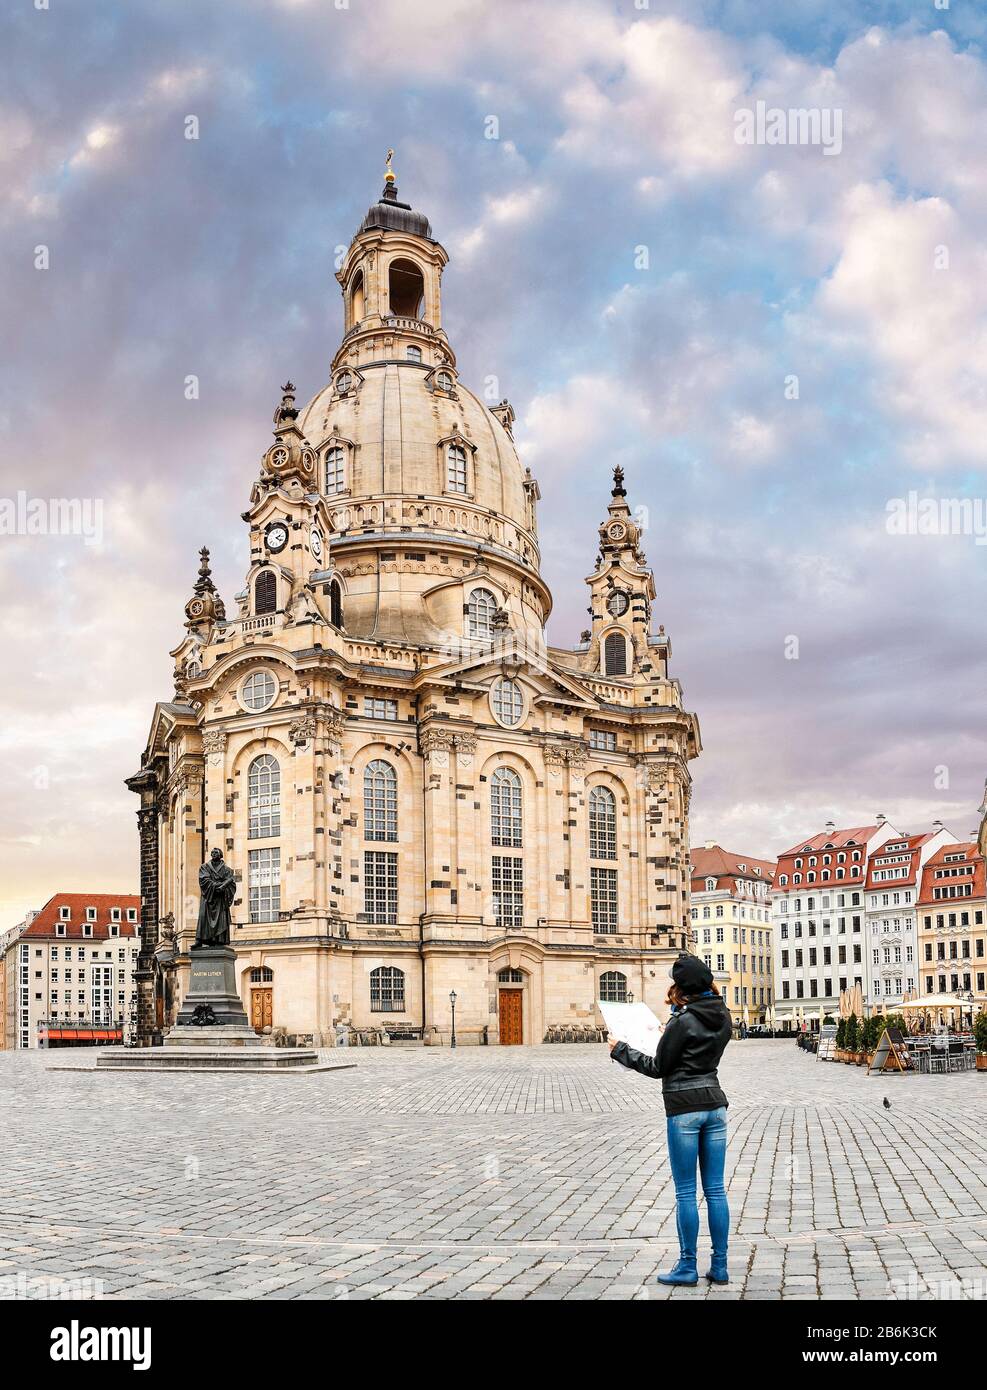 Woman tourist with the map near famous landmark of the Dresden city - Frauenkirche Church of Our Lady Stock Photo